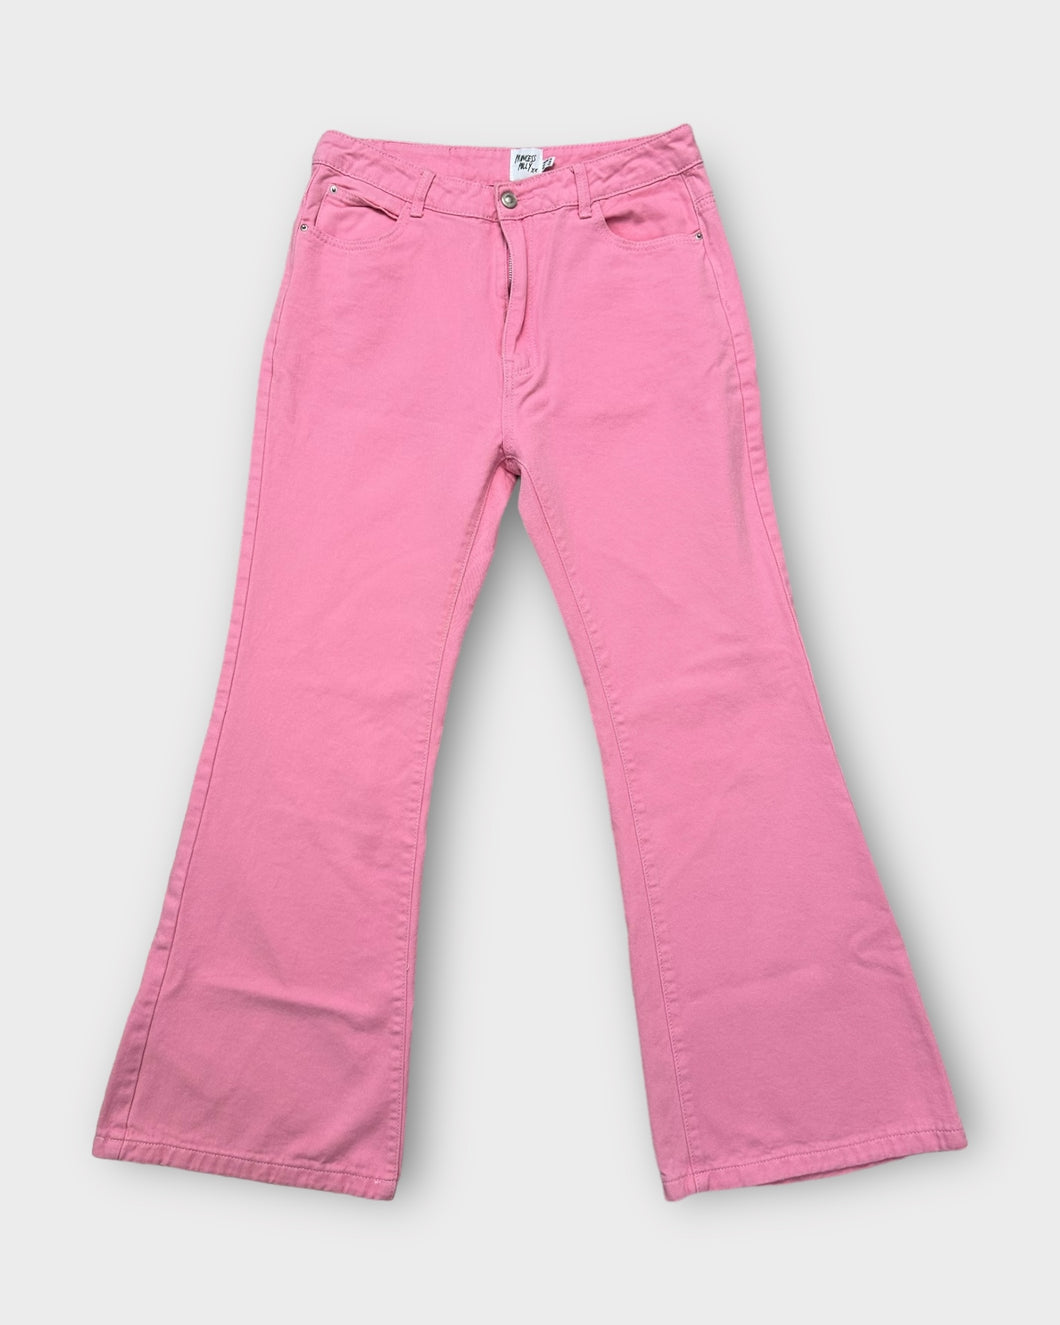 Princess Polly Pink Cascade Flare Jeans (10)